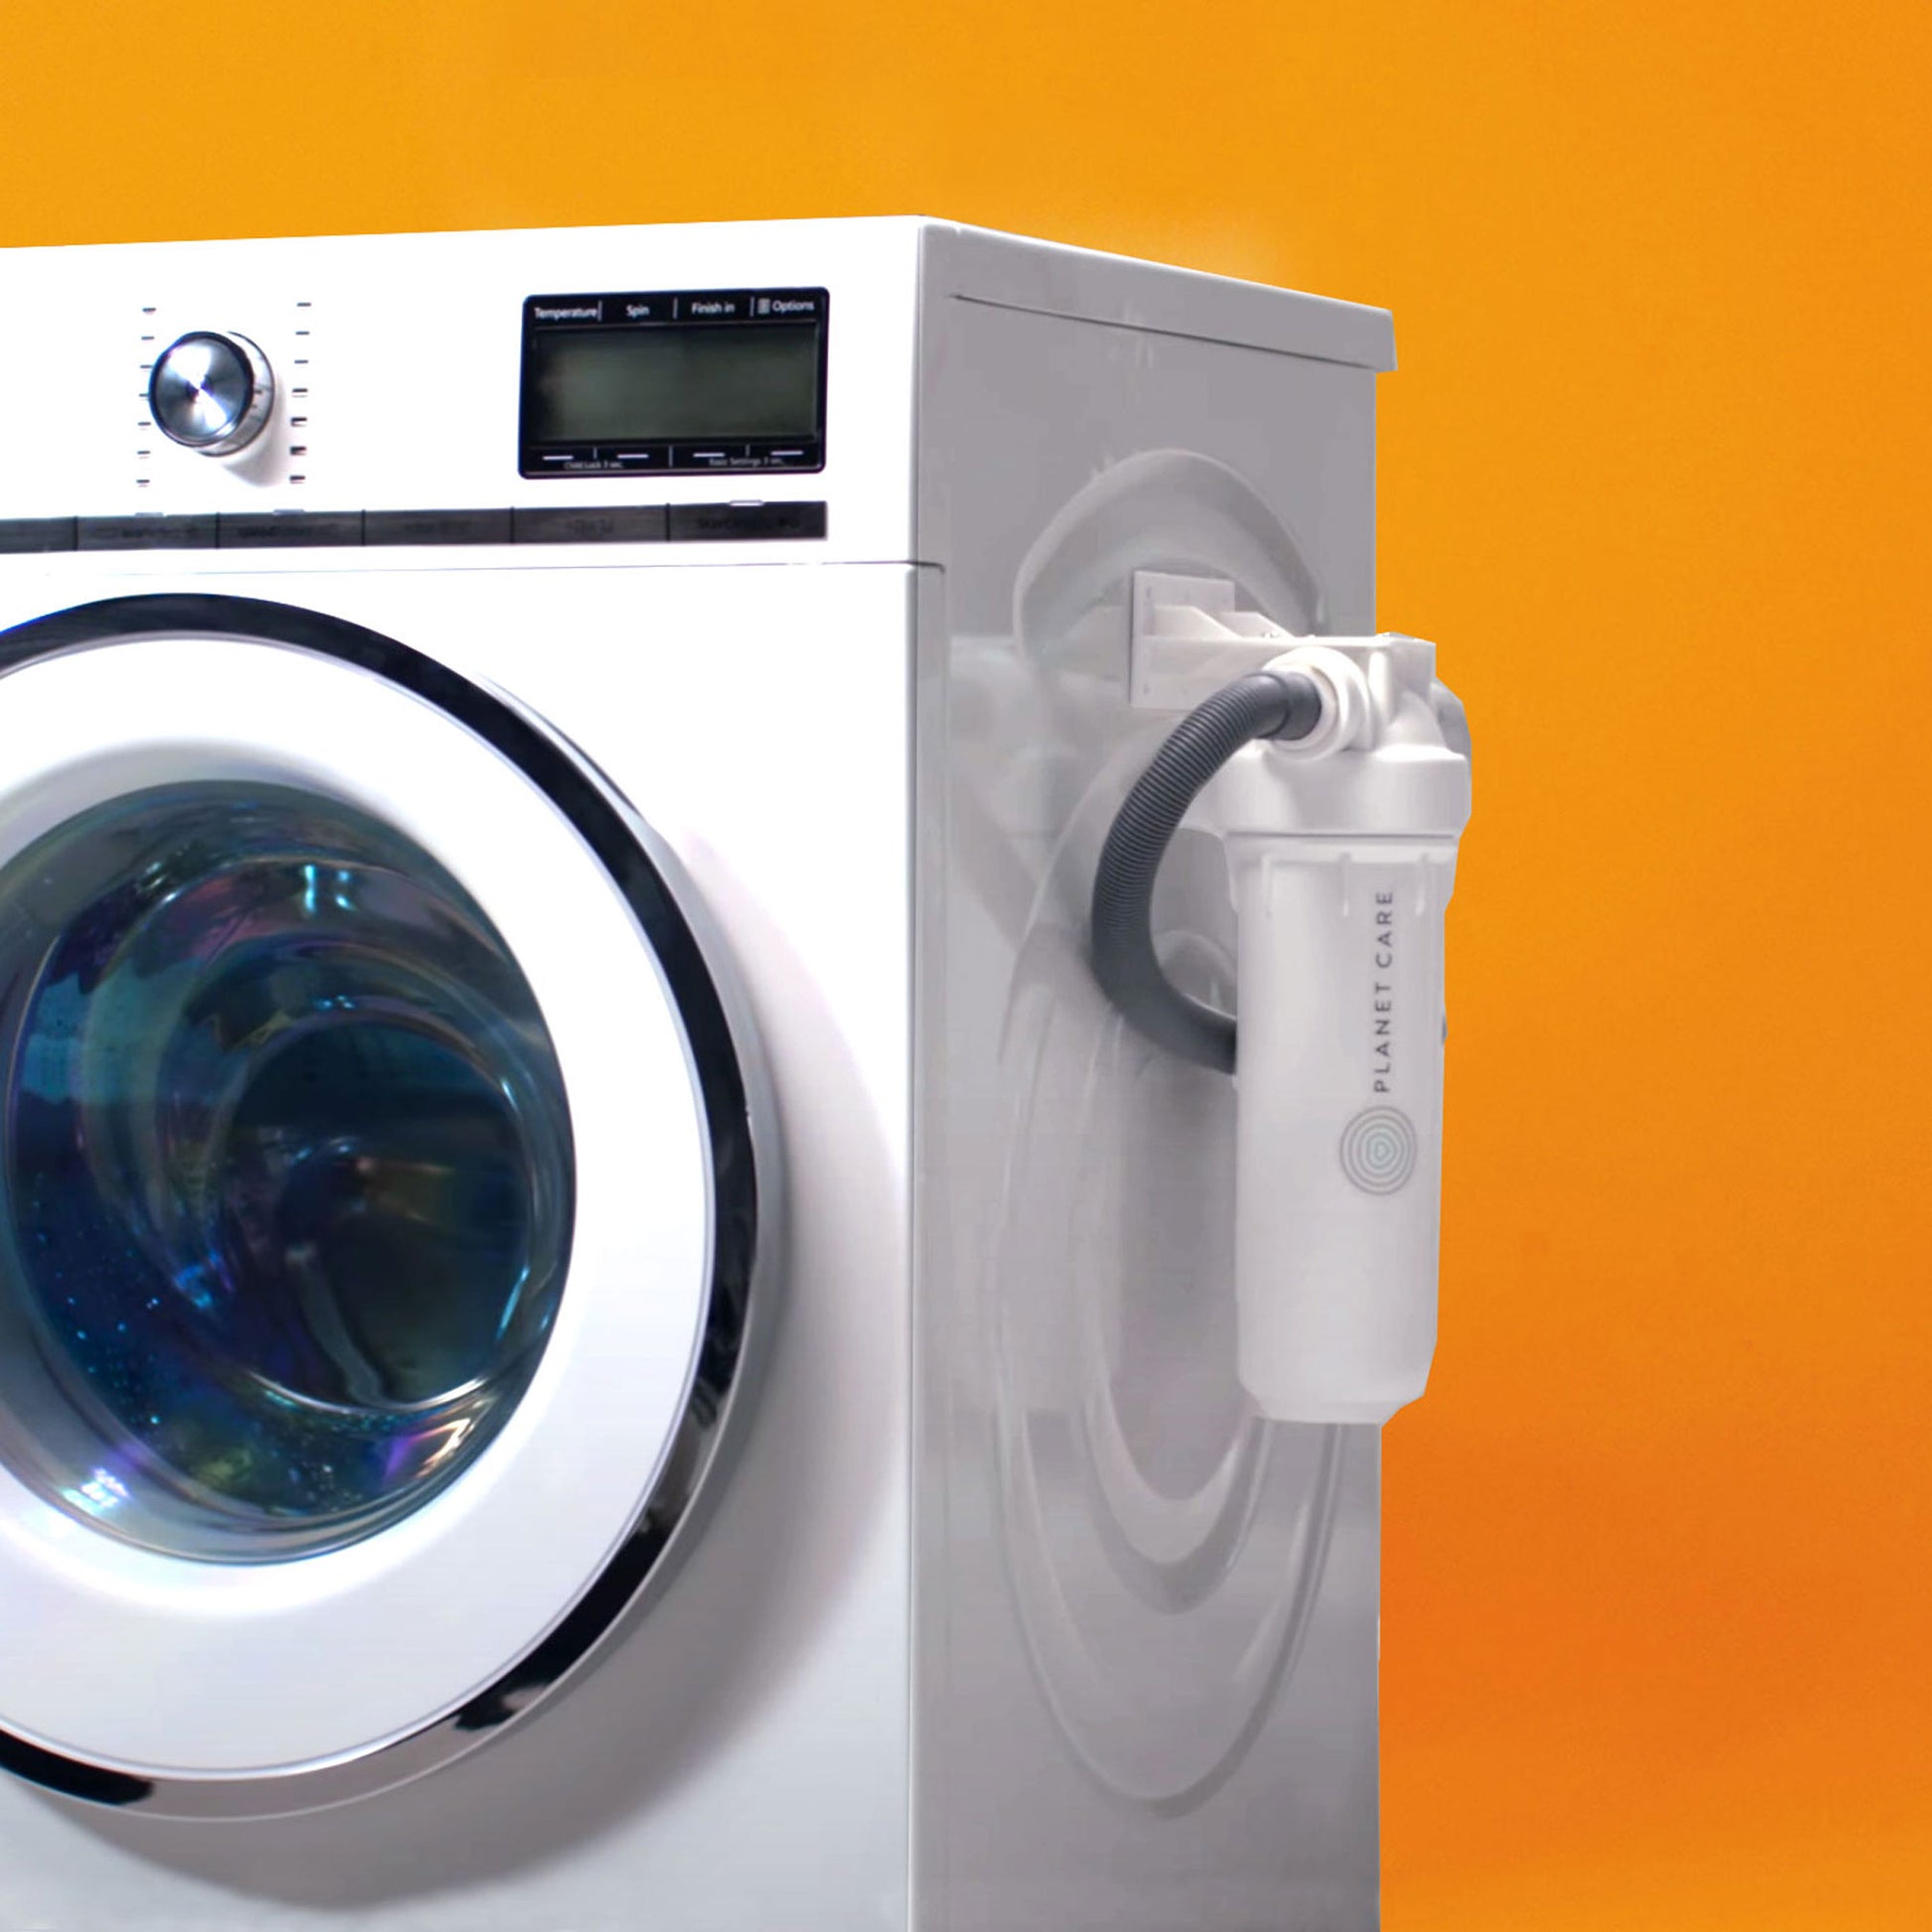 A white washing machine installed with the PlanetCare microfiber filter on the side